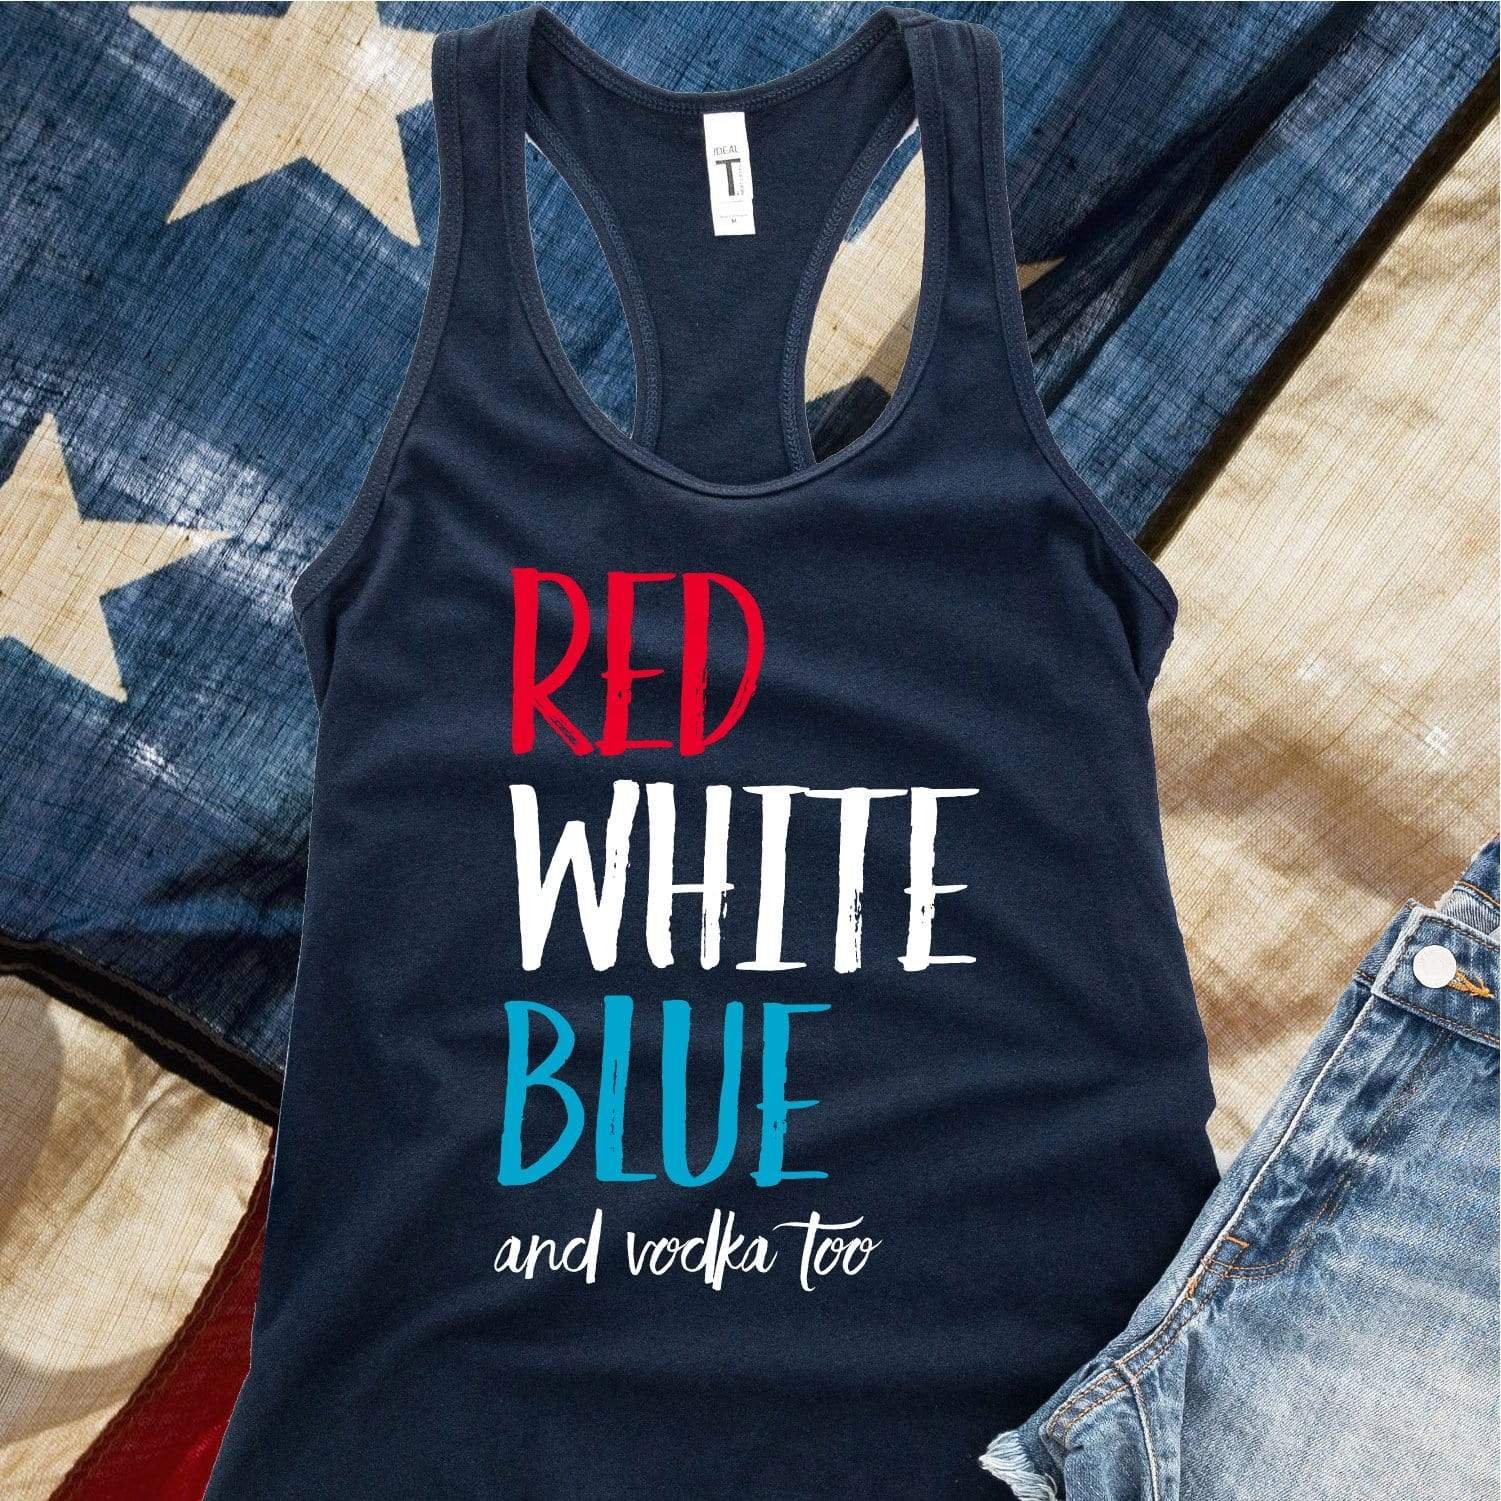 cute red white and blue shirts